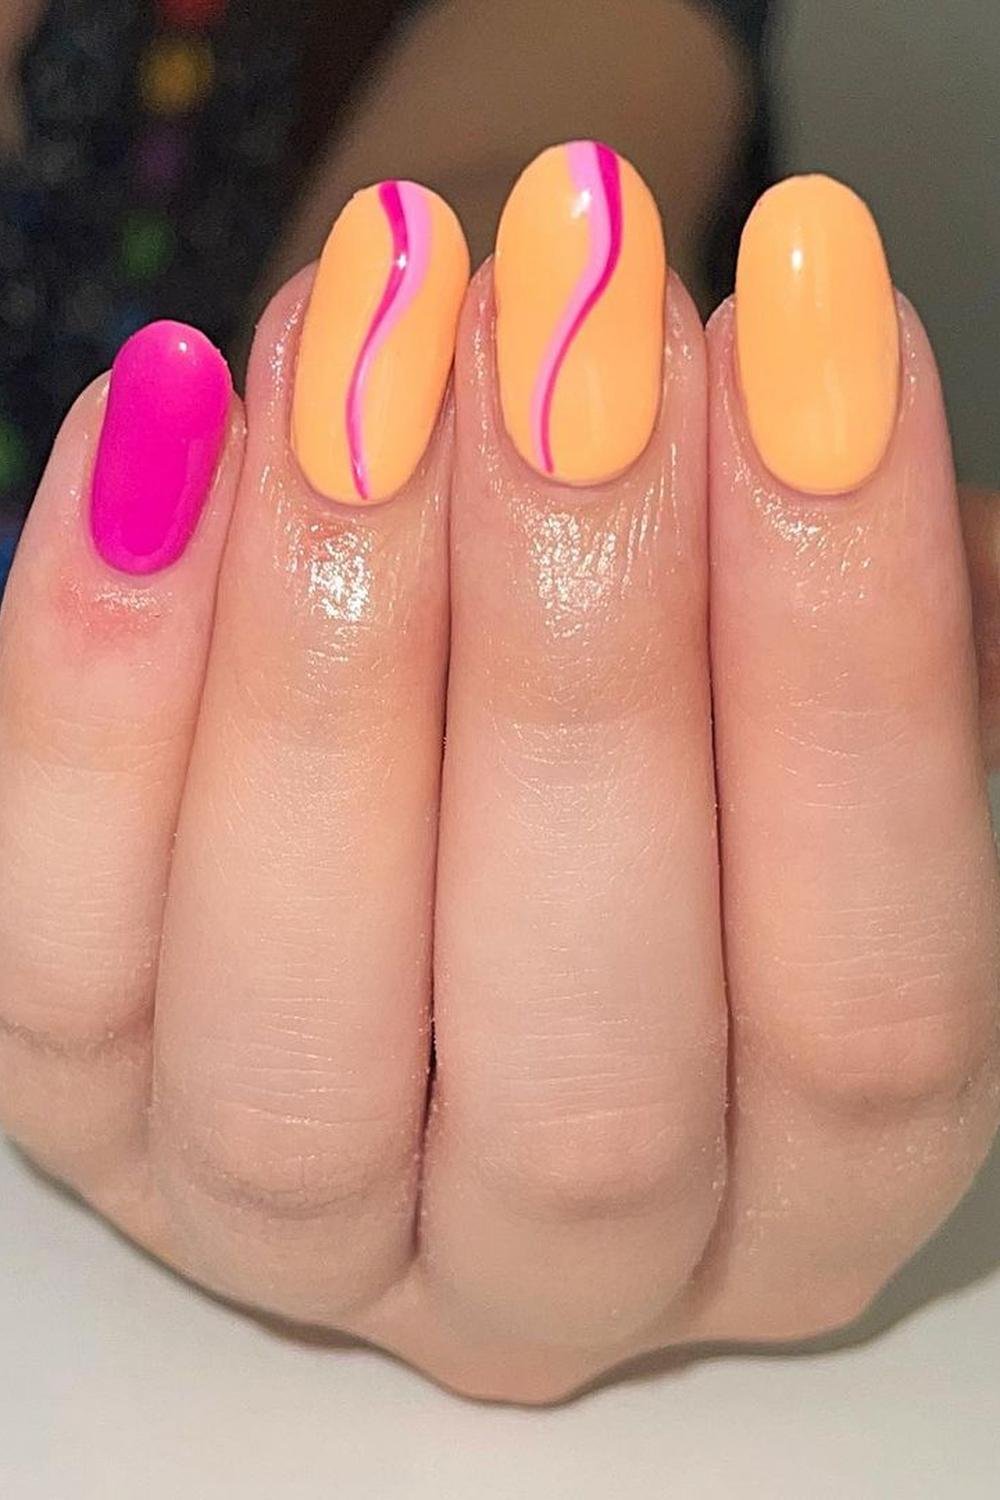 6 - Picture of Pink and Orange Nails